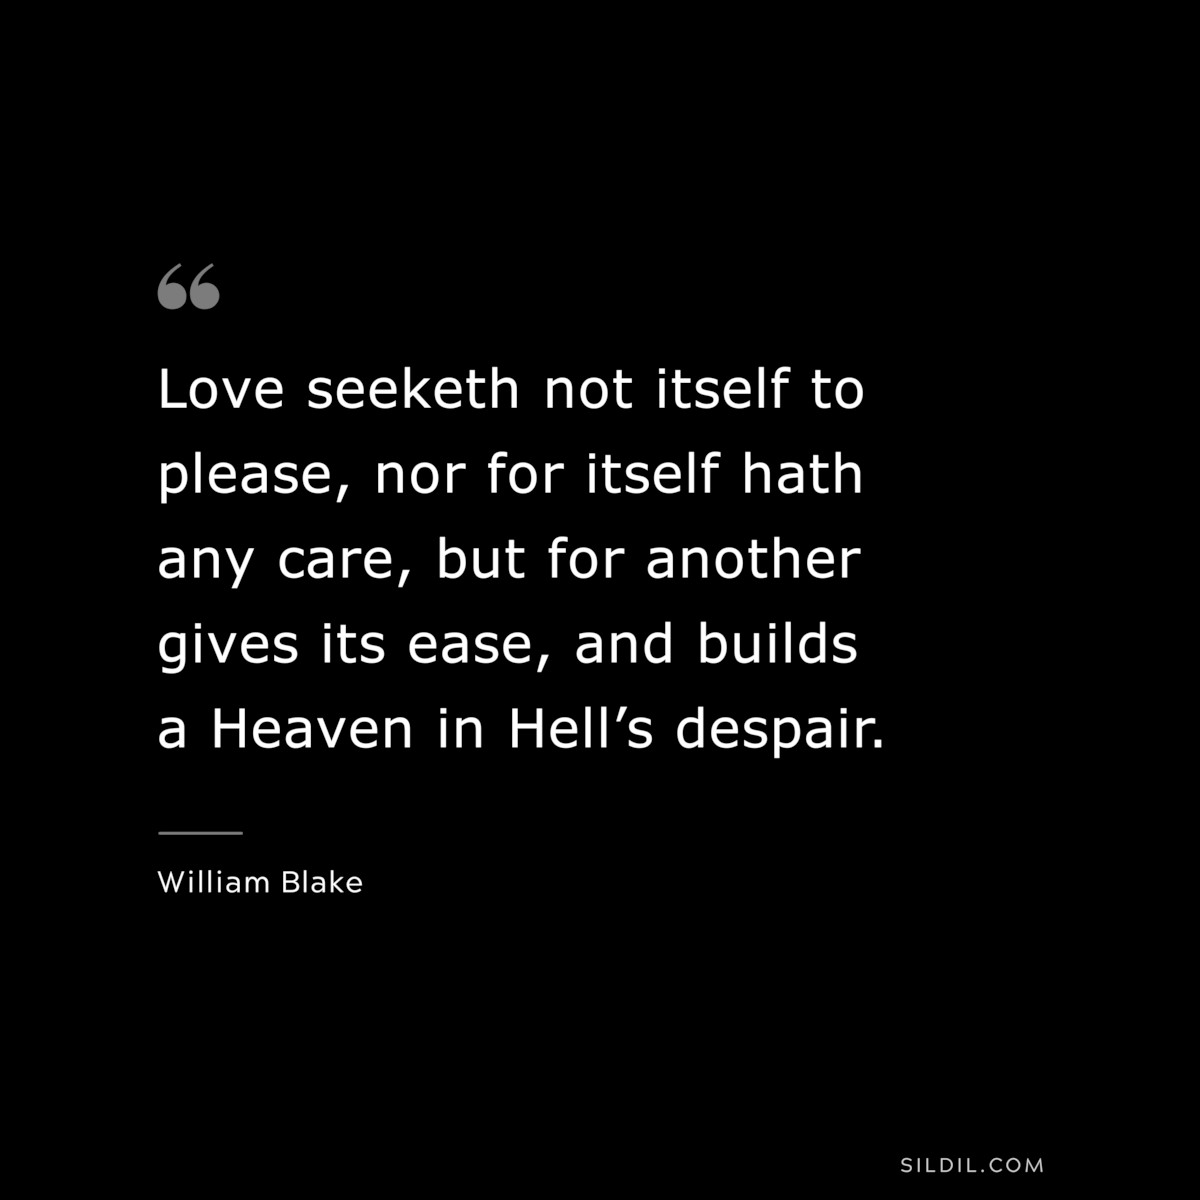 Love seeketh not itself to please, nor for itself hath any care, but for another gives its ease, and builds a Heaven in Hell’s despair. ― William Blake